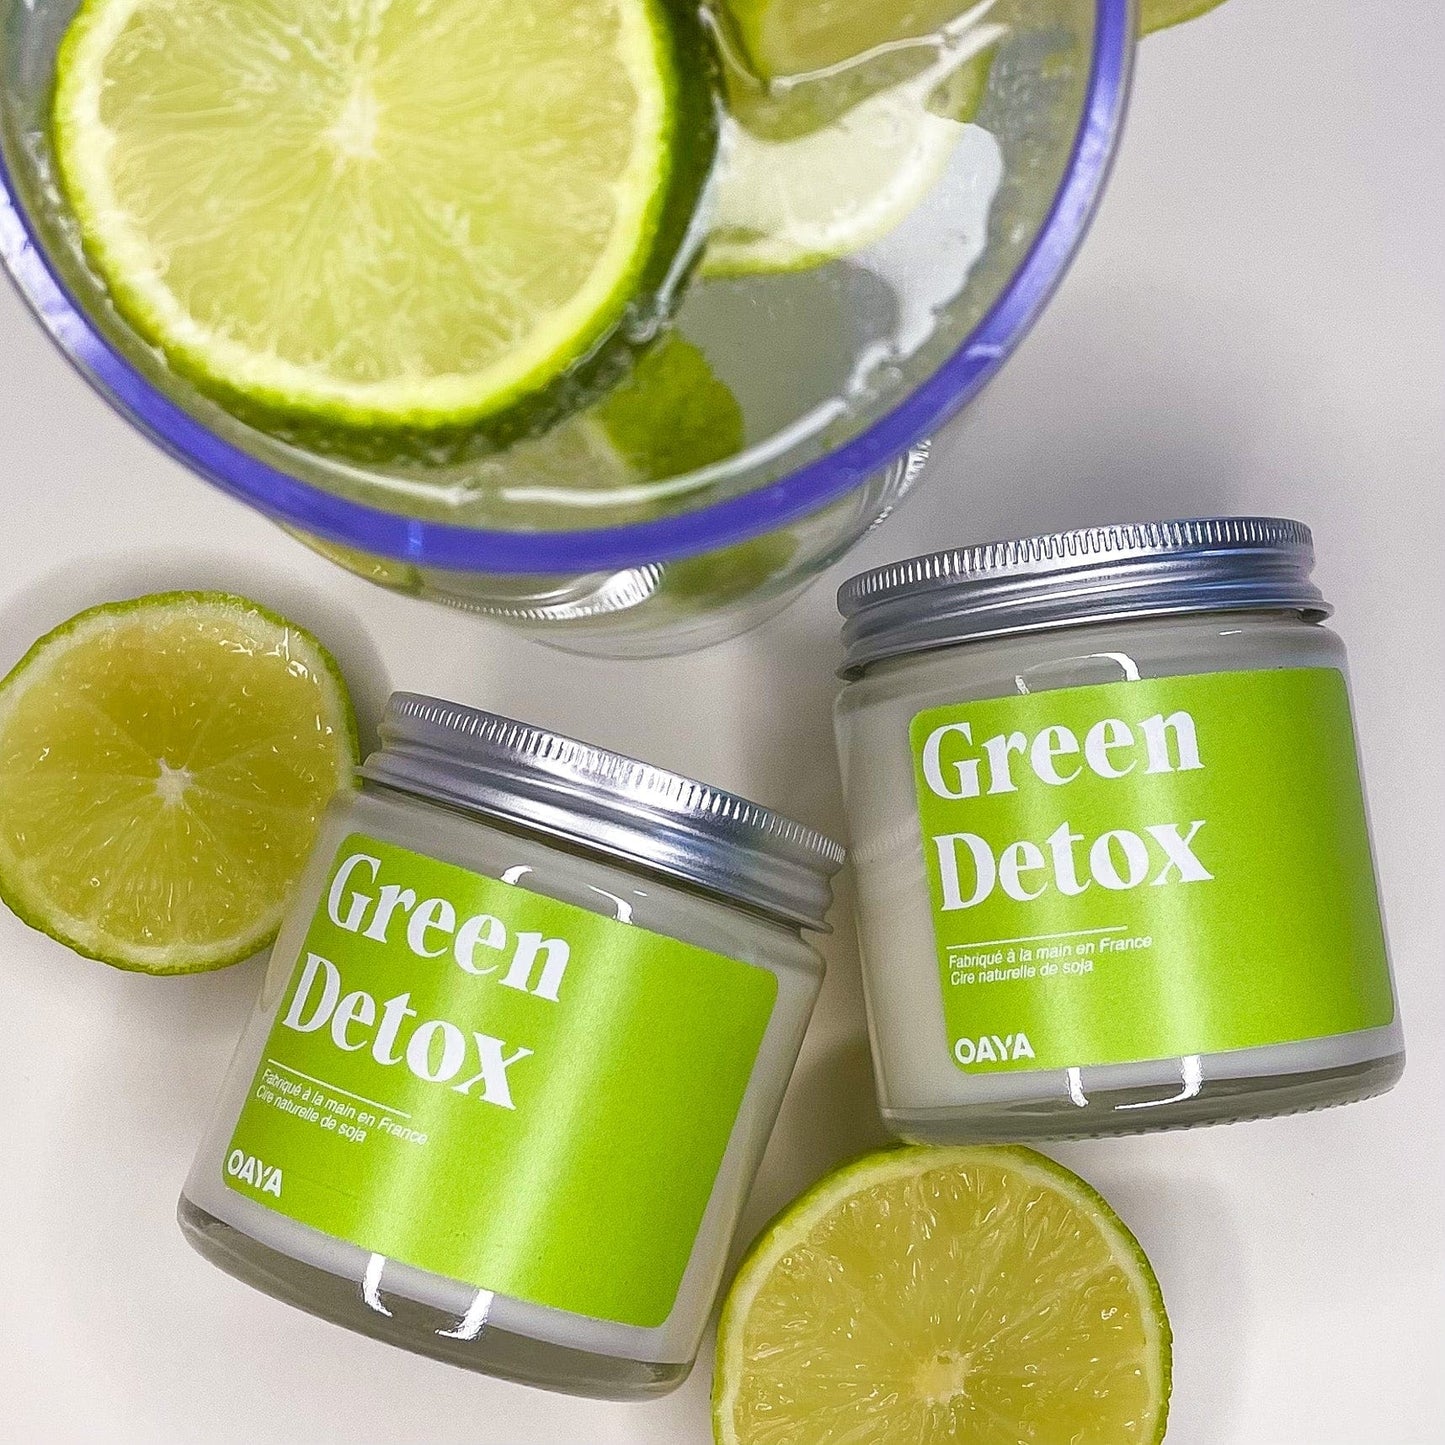 Green Detox Candle | Lime